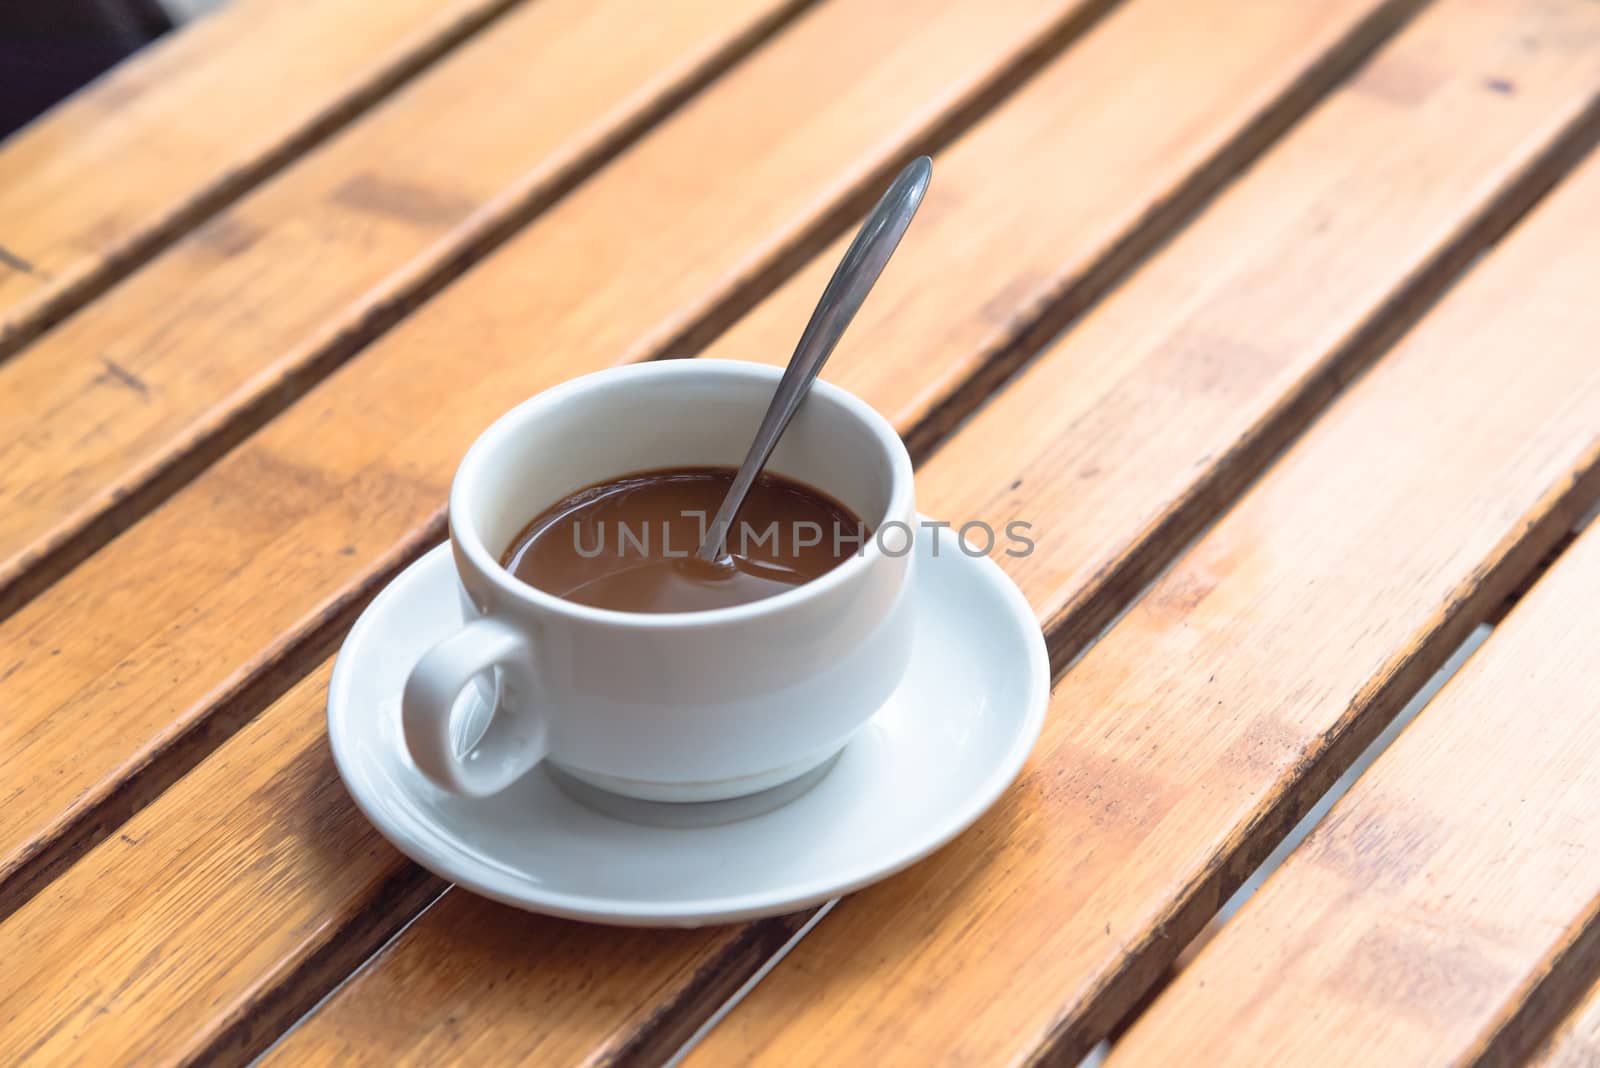 Popular Vietnamese milk coffee in ceramic cup and saucer with stainless spoon on outdoor wooden table. Top view a morning Vietnamese gourmet drink. Food concept.